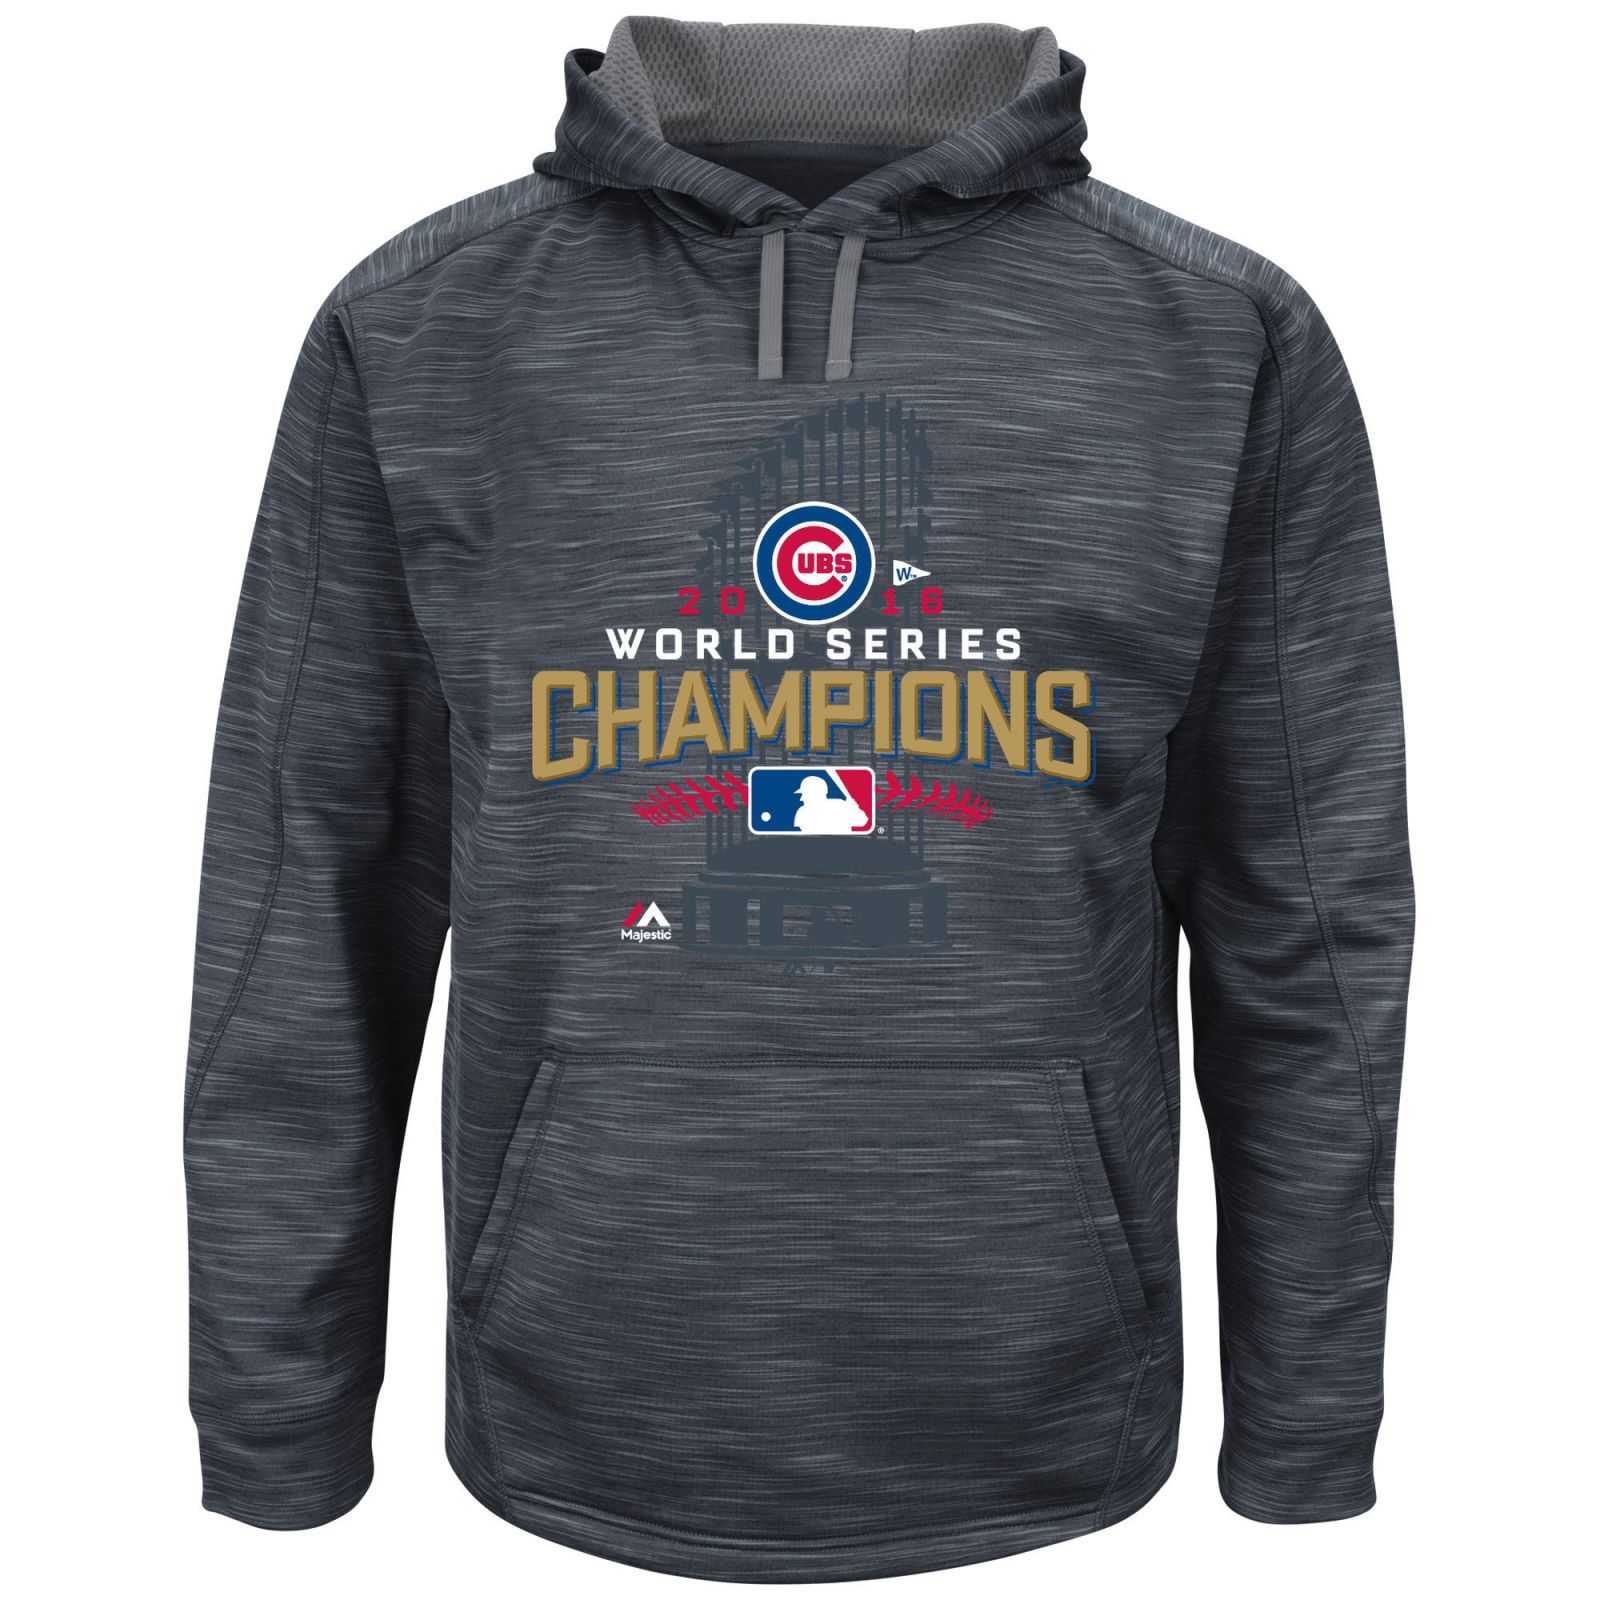 2016 chicago cubs shirts